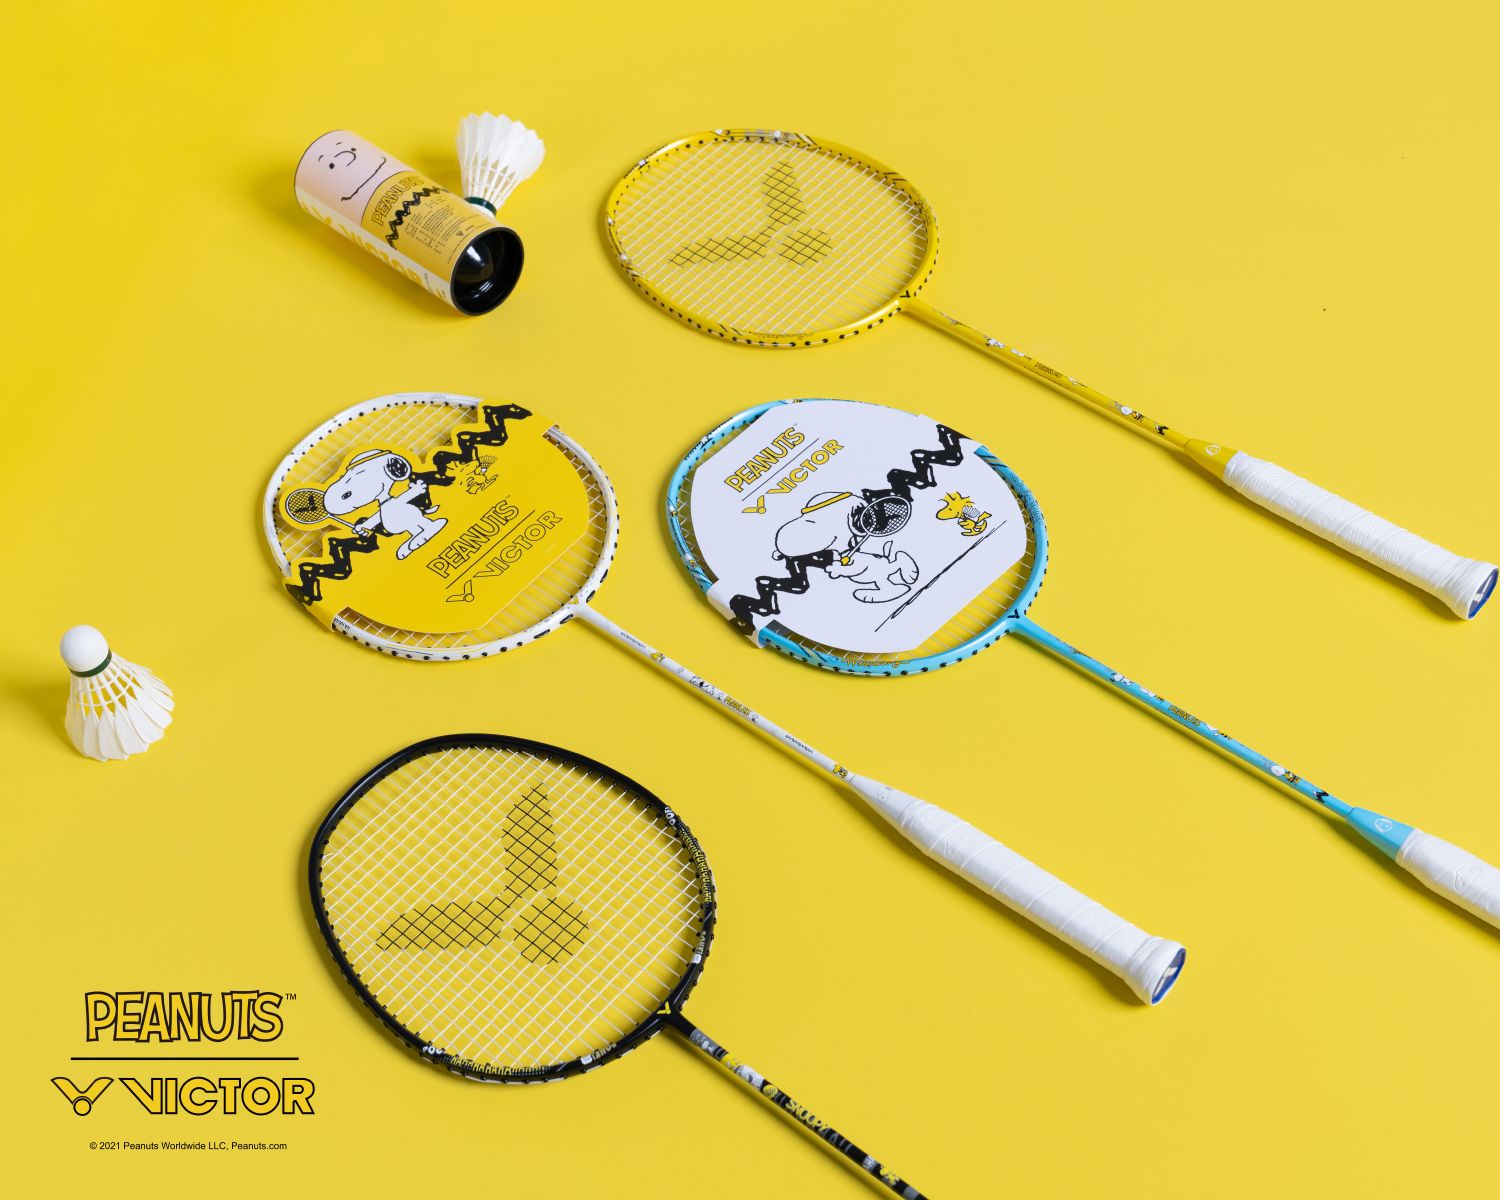 Protective Cover Review: VICTOR X PEANUTS SNOOPY Grip for Rackets - The Perfect Handle Solution